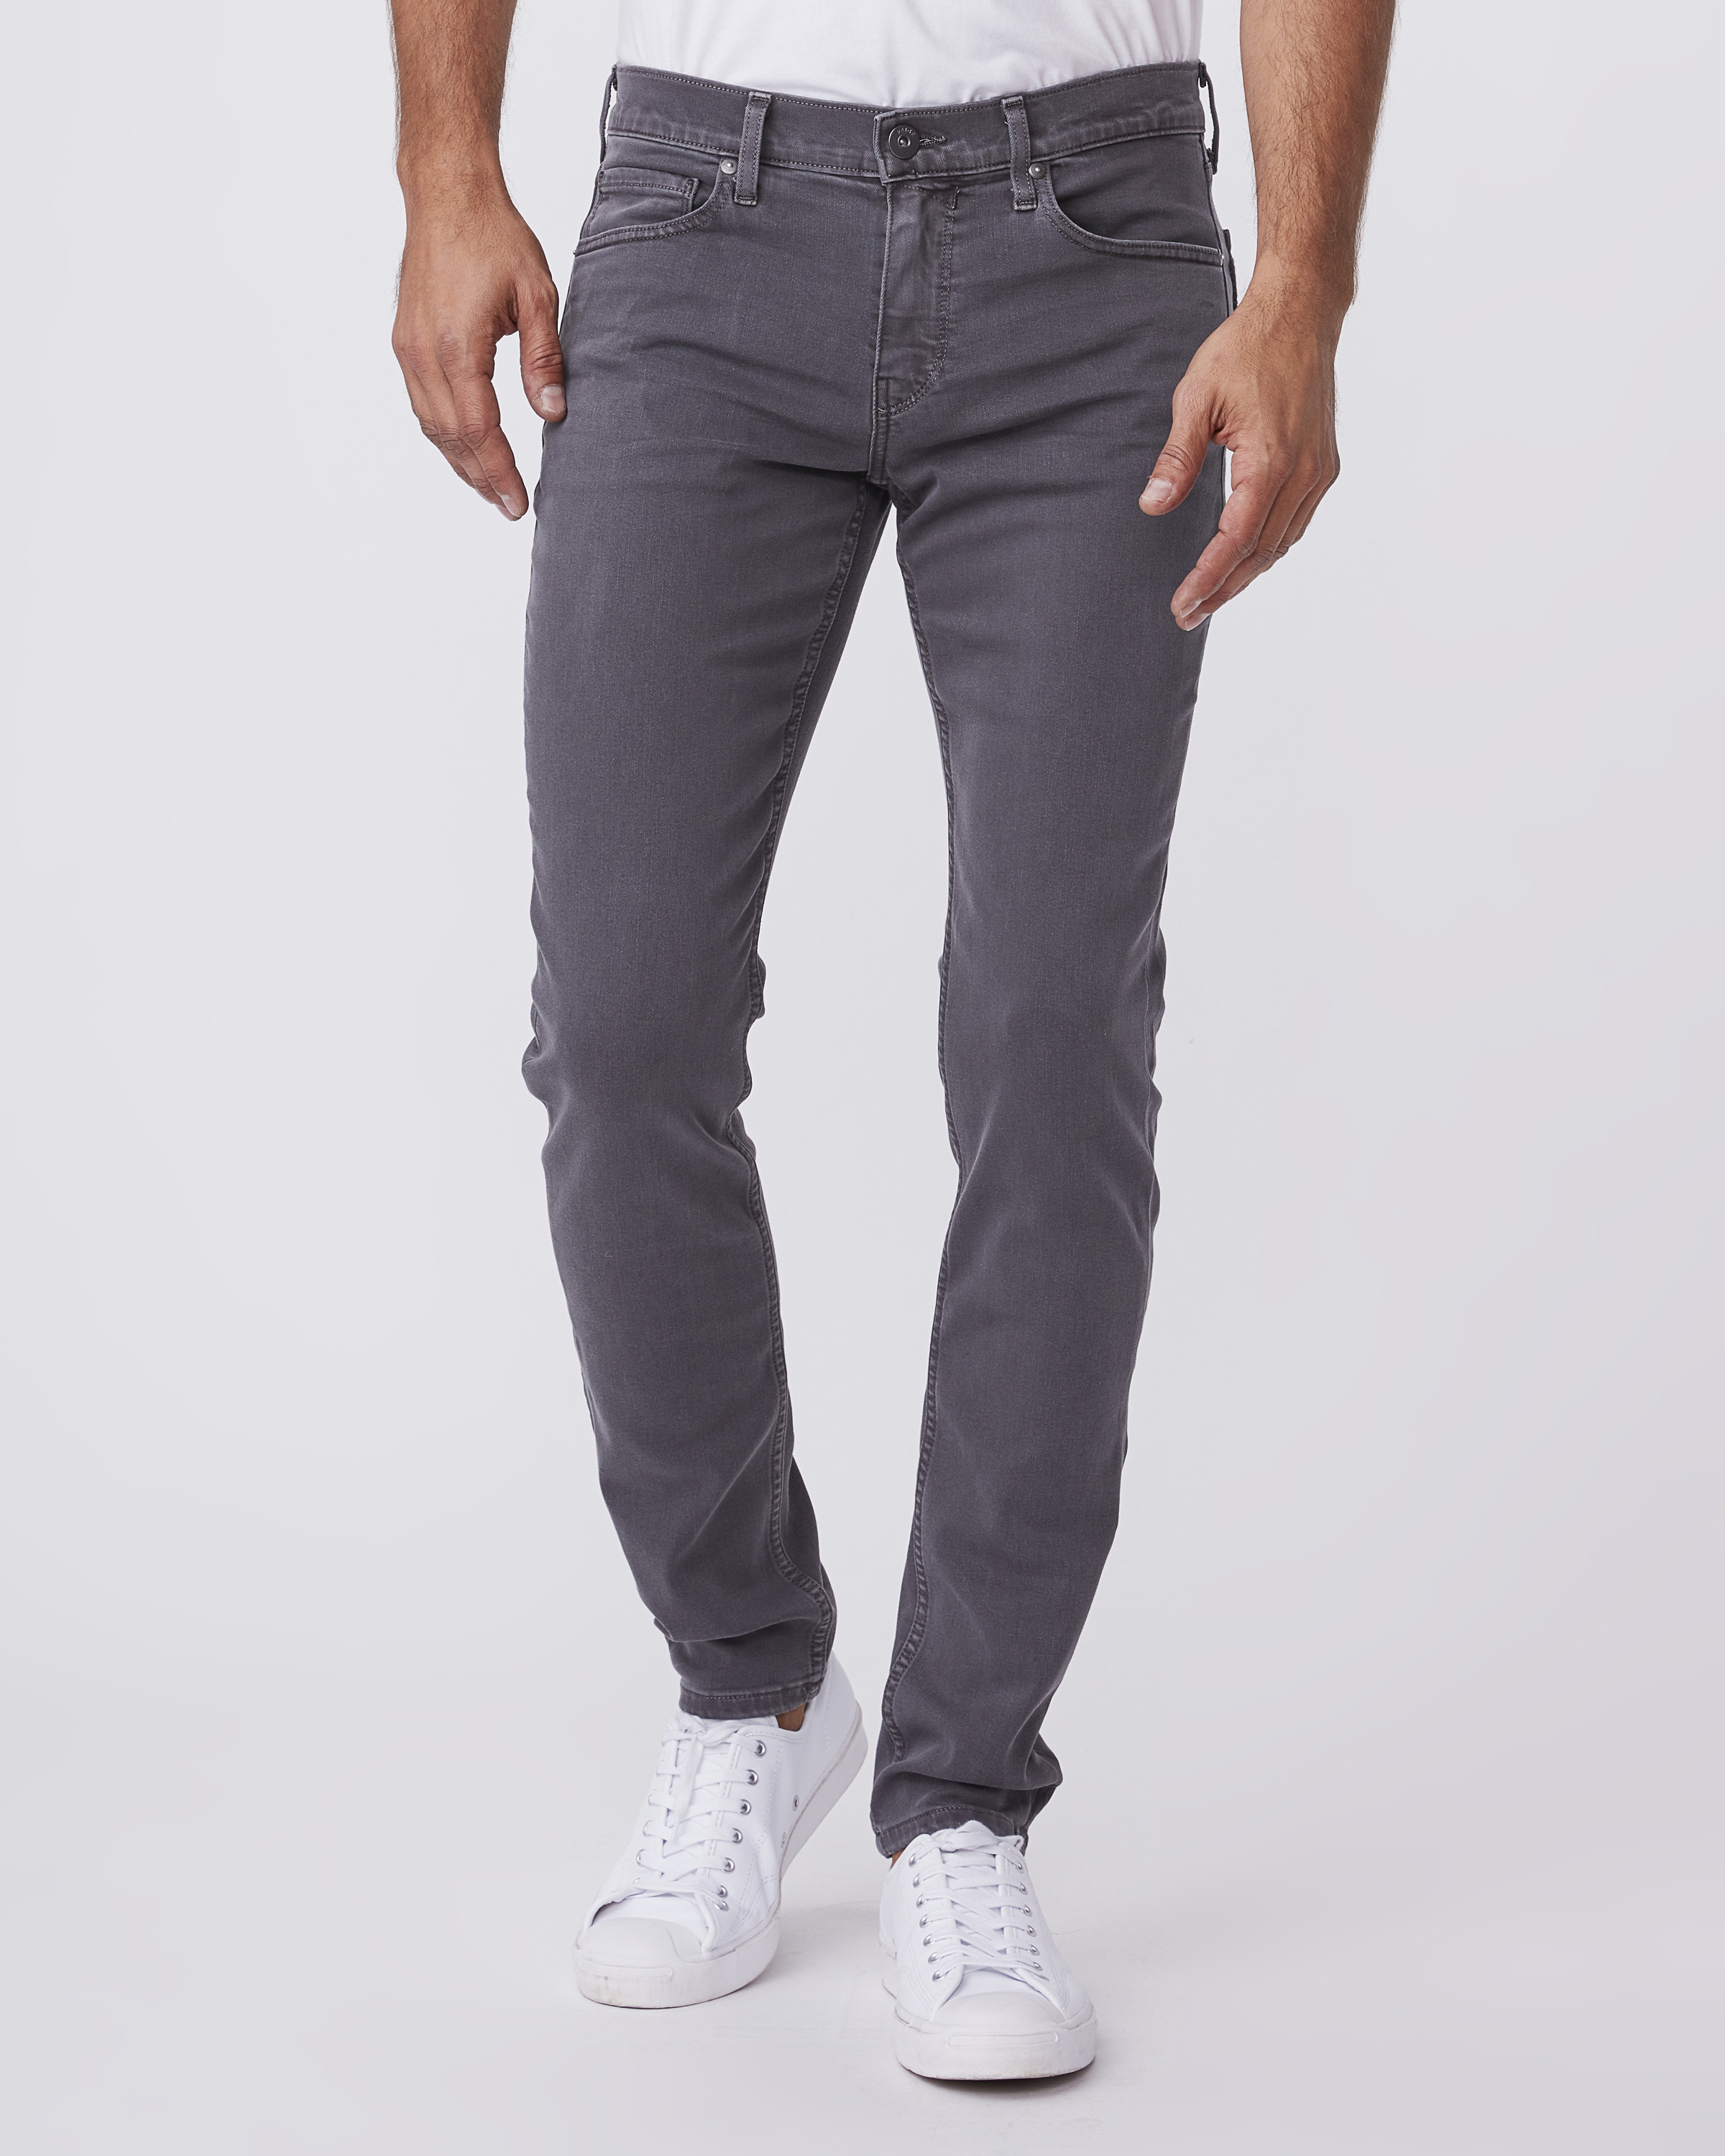 paige men's the icon collection // croft - vintage empire grey ultra skinny jeans | size 28